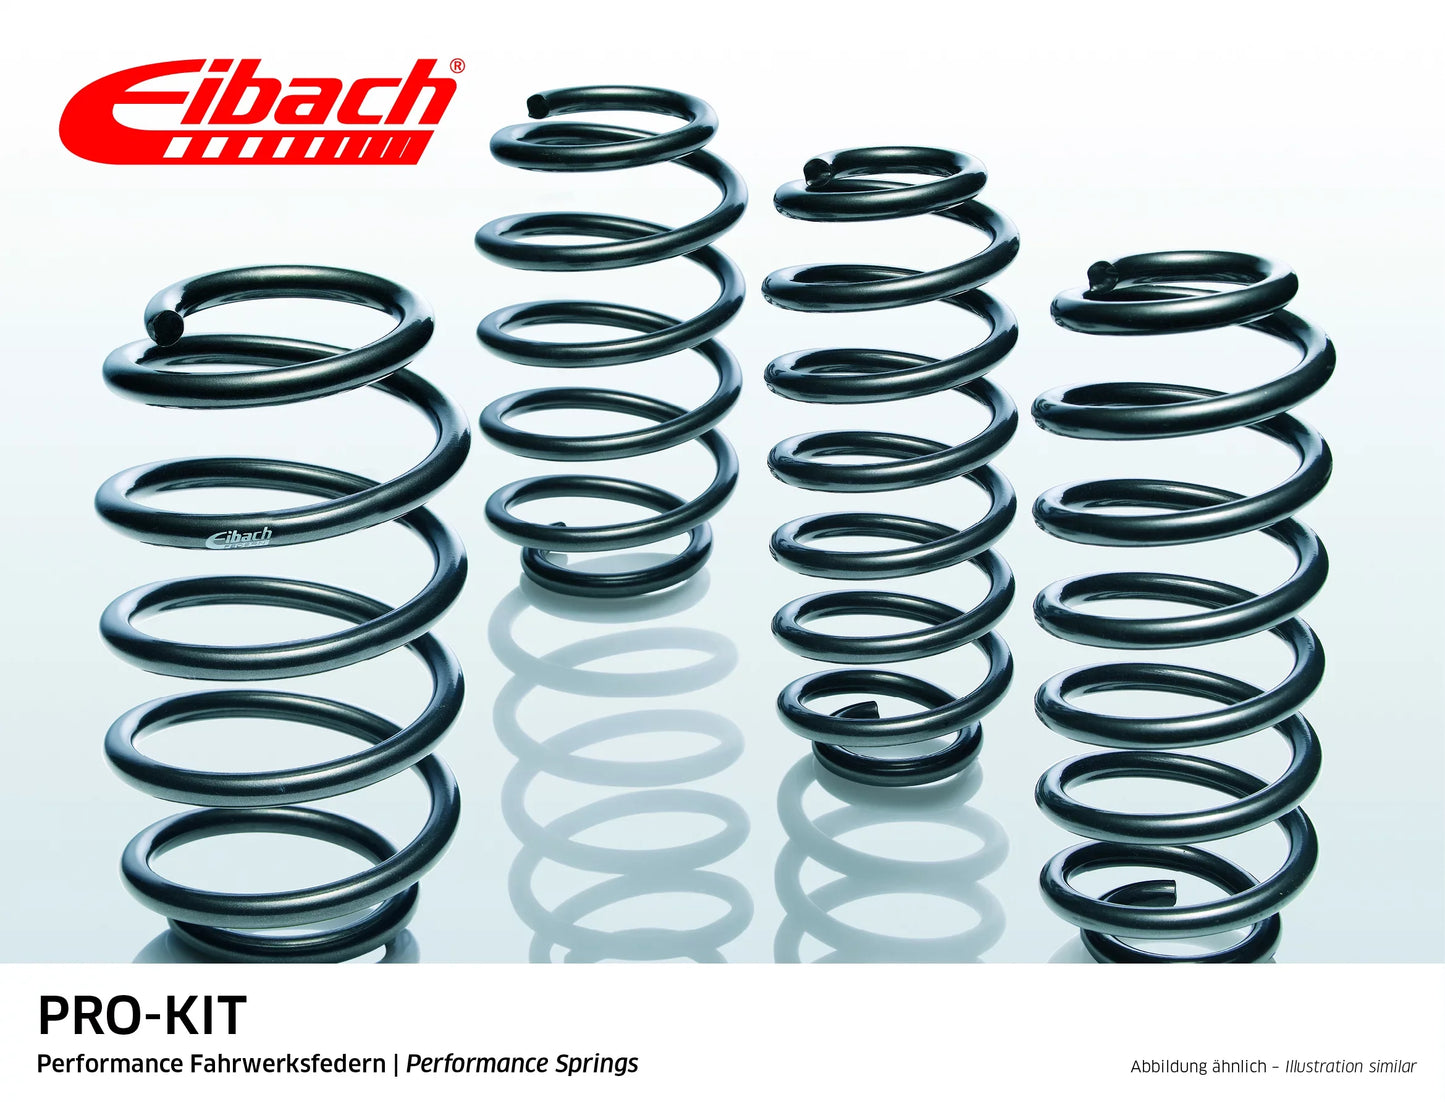 Eibach Pro-Kit Lowering Springs (E10-35-016-05-22) at £244.80